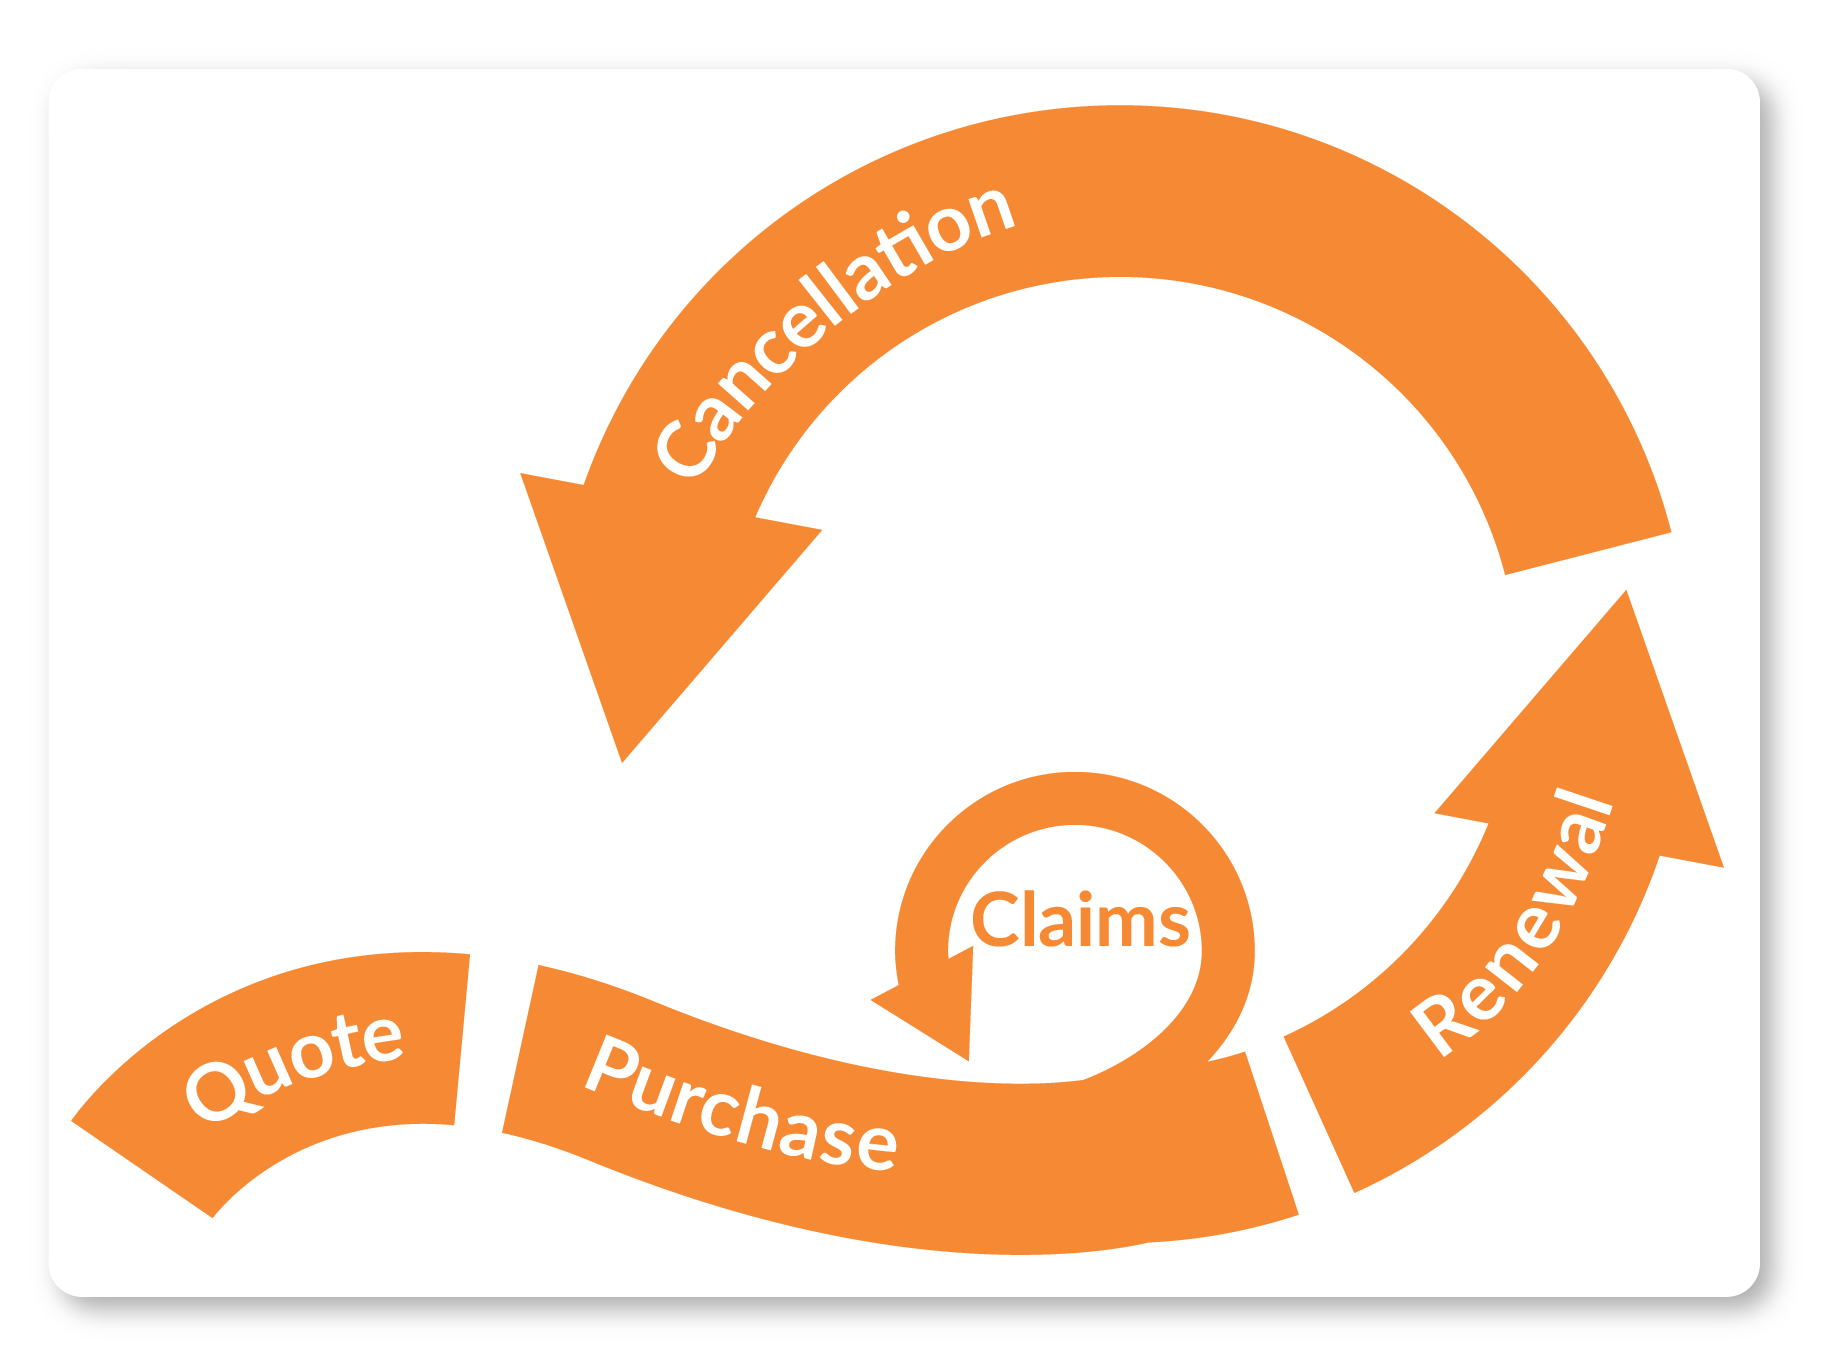 Insurance life cycle analysis with Touchpoint Group